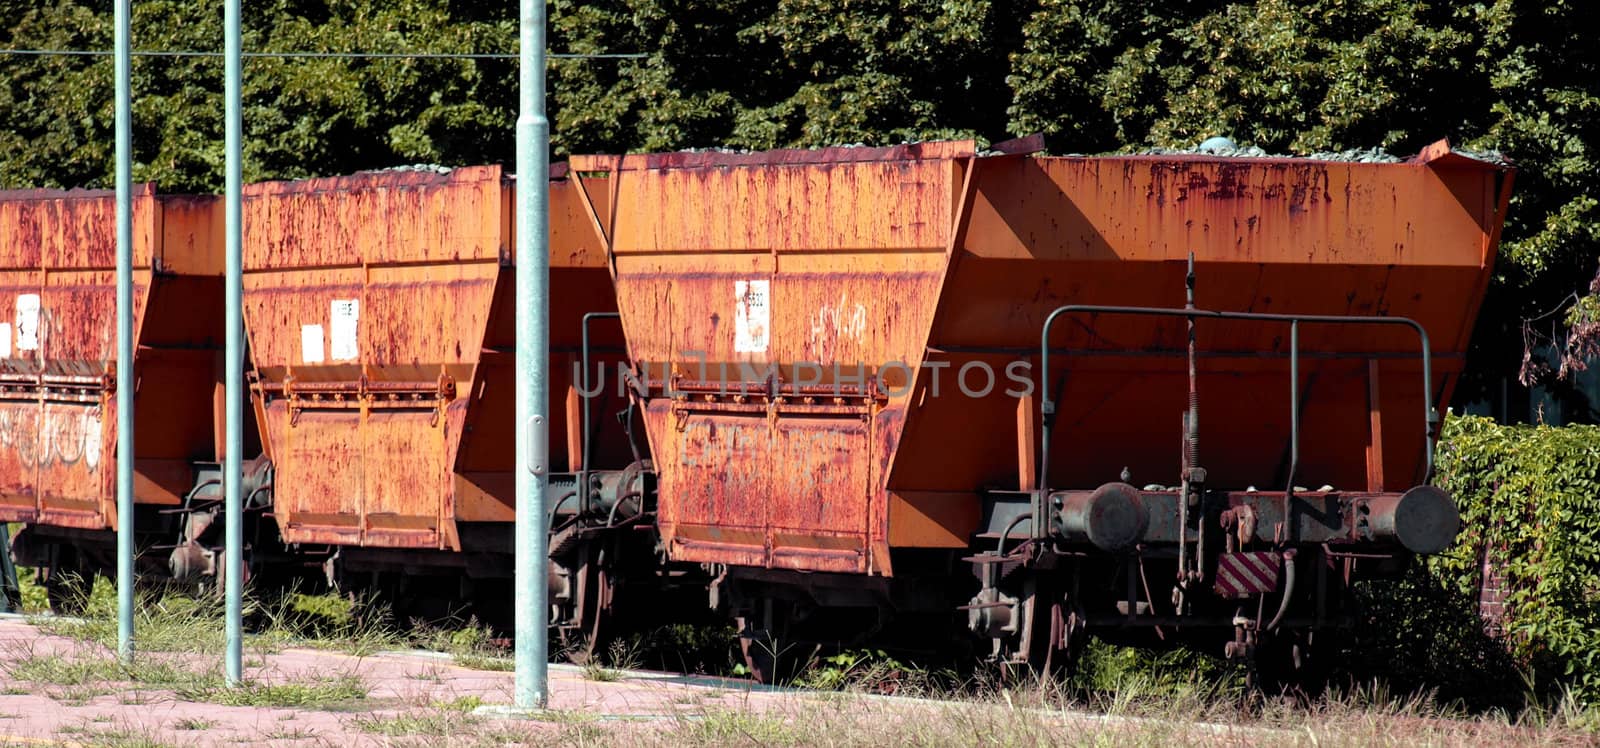 Yellow cargo train wagons at a station